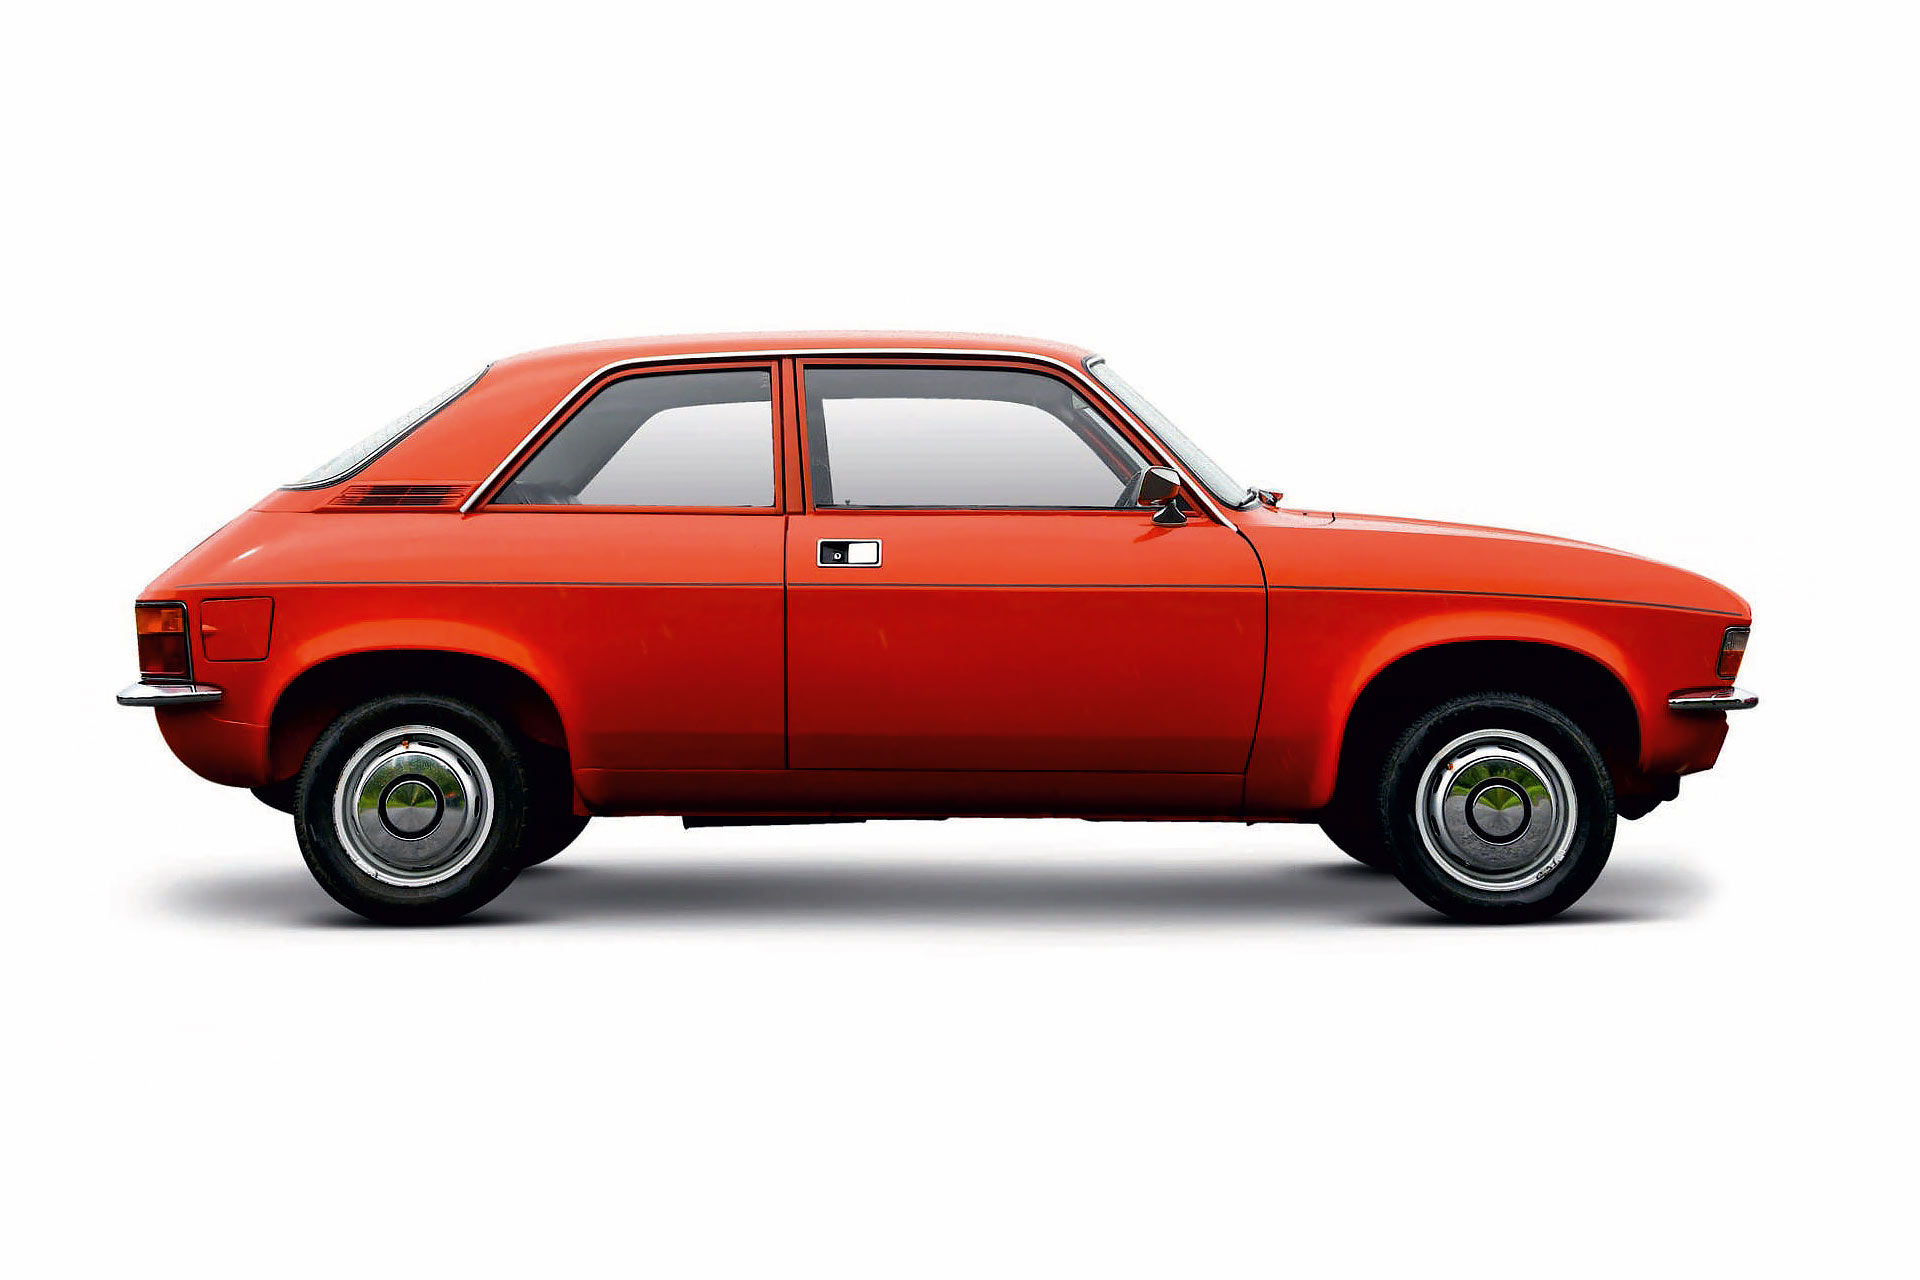 Austin Allegro – the full story of the car that defined its